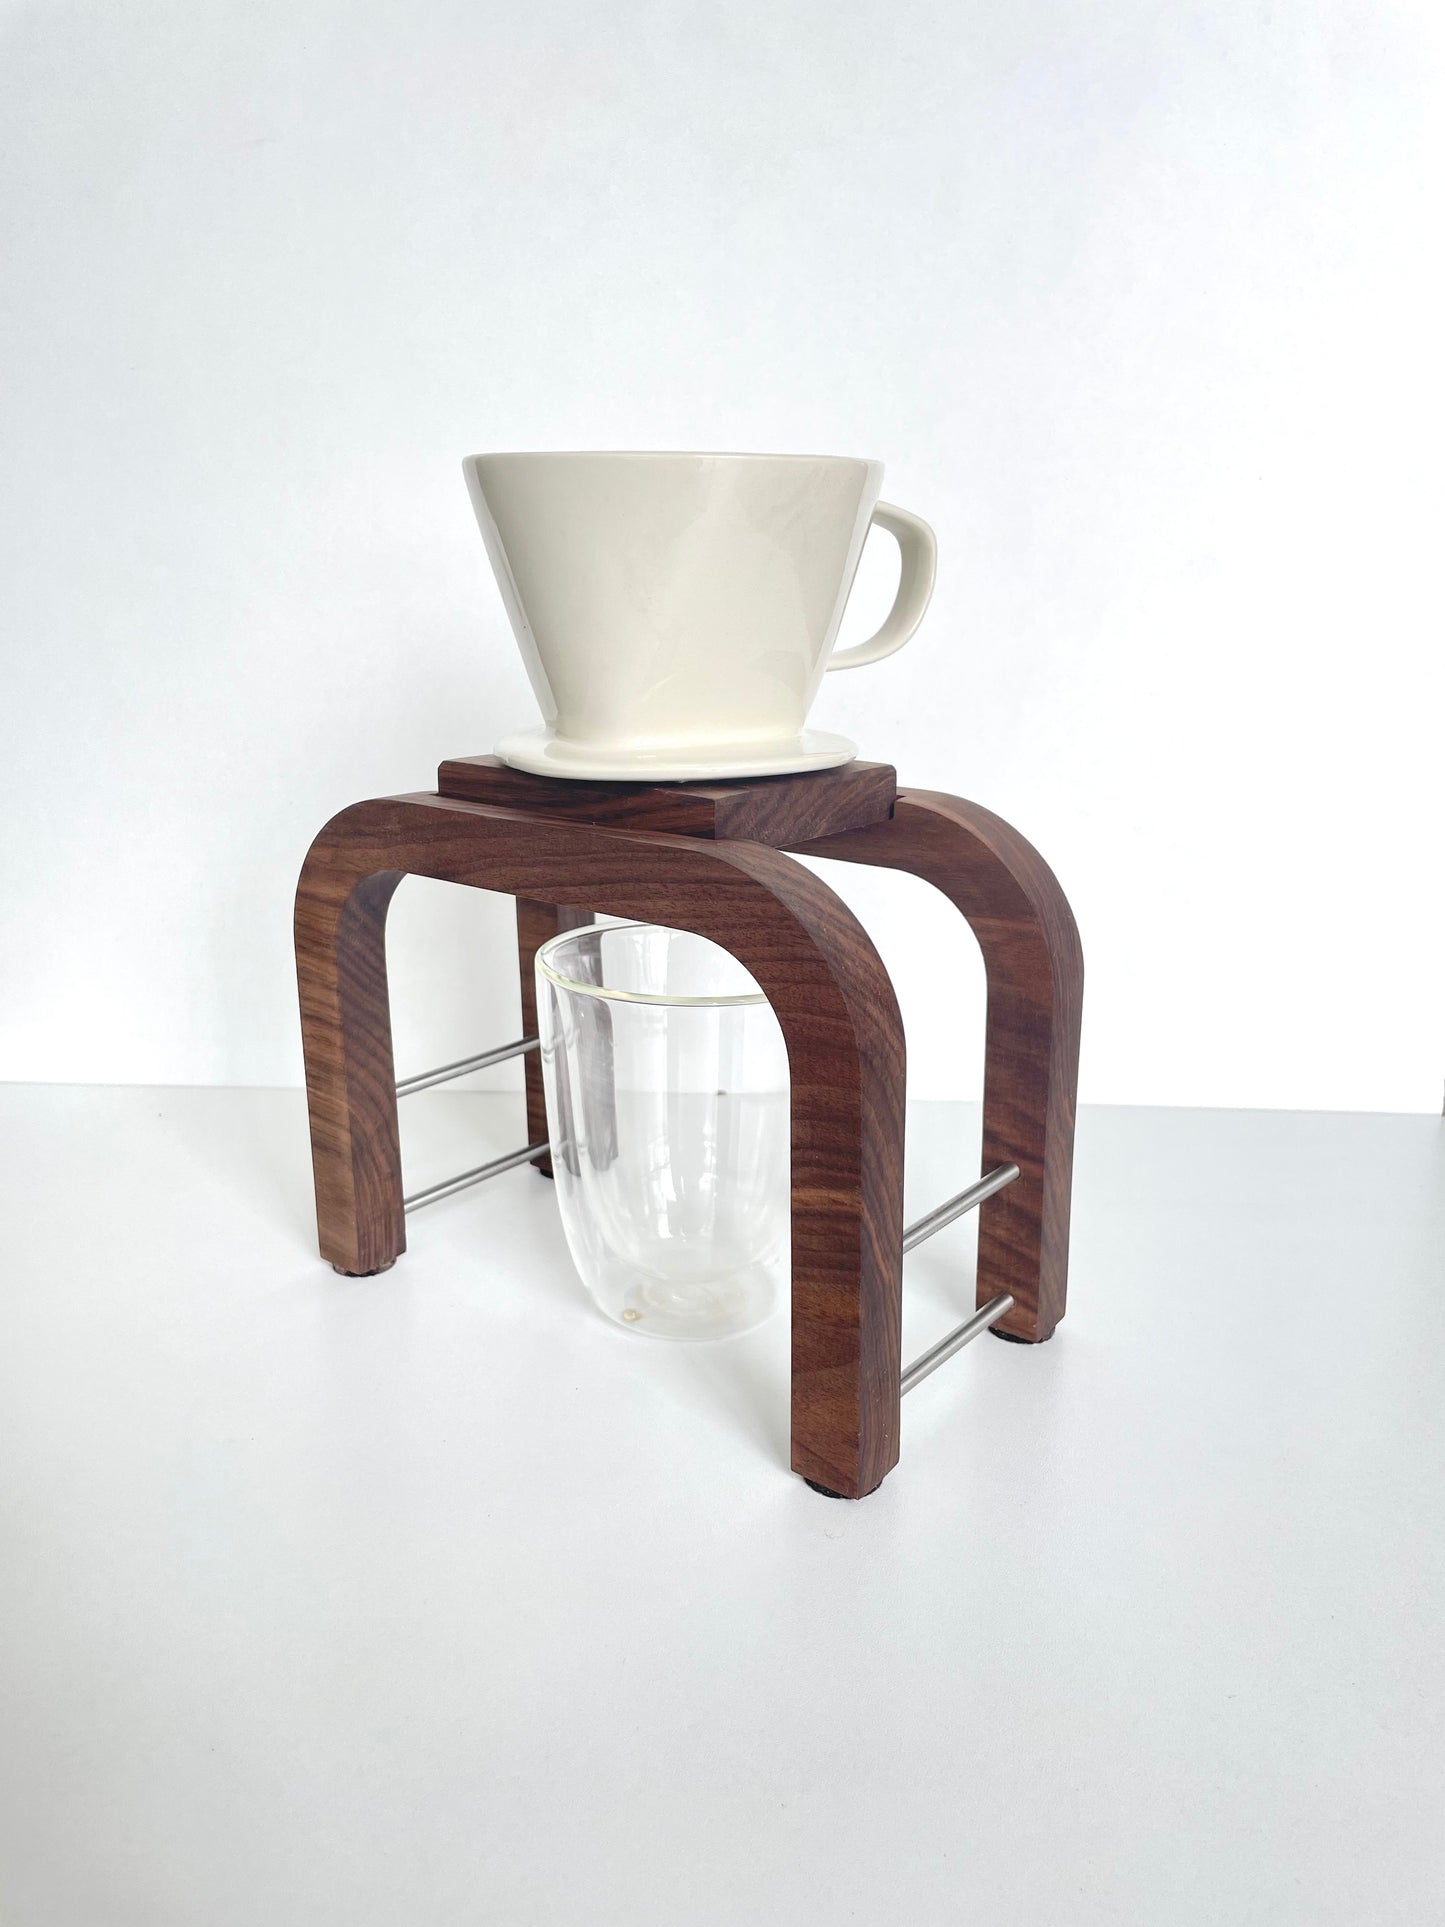 Pour Over Coffee Stand | Dripper Stand | Wooden Coffee Drip Stand | Drip Coffee Maker